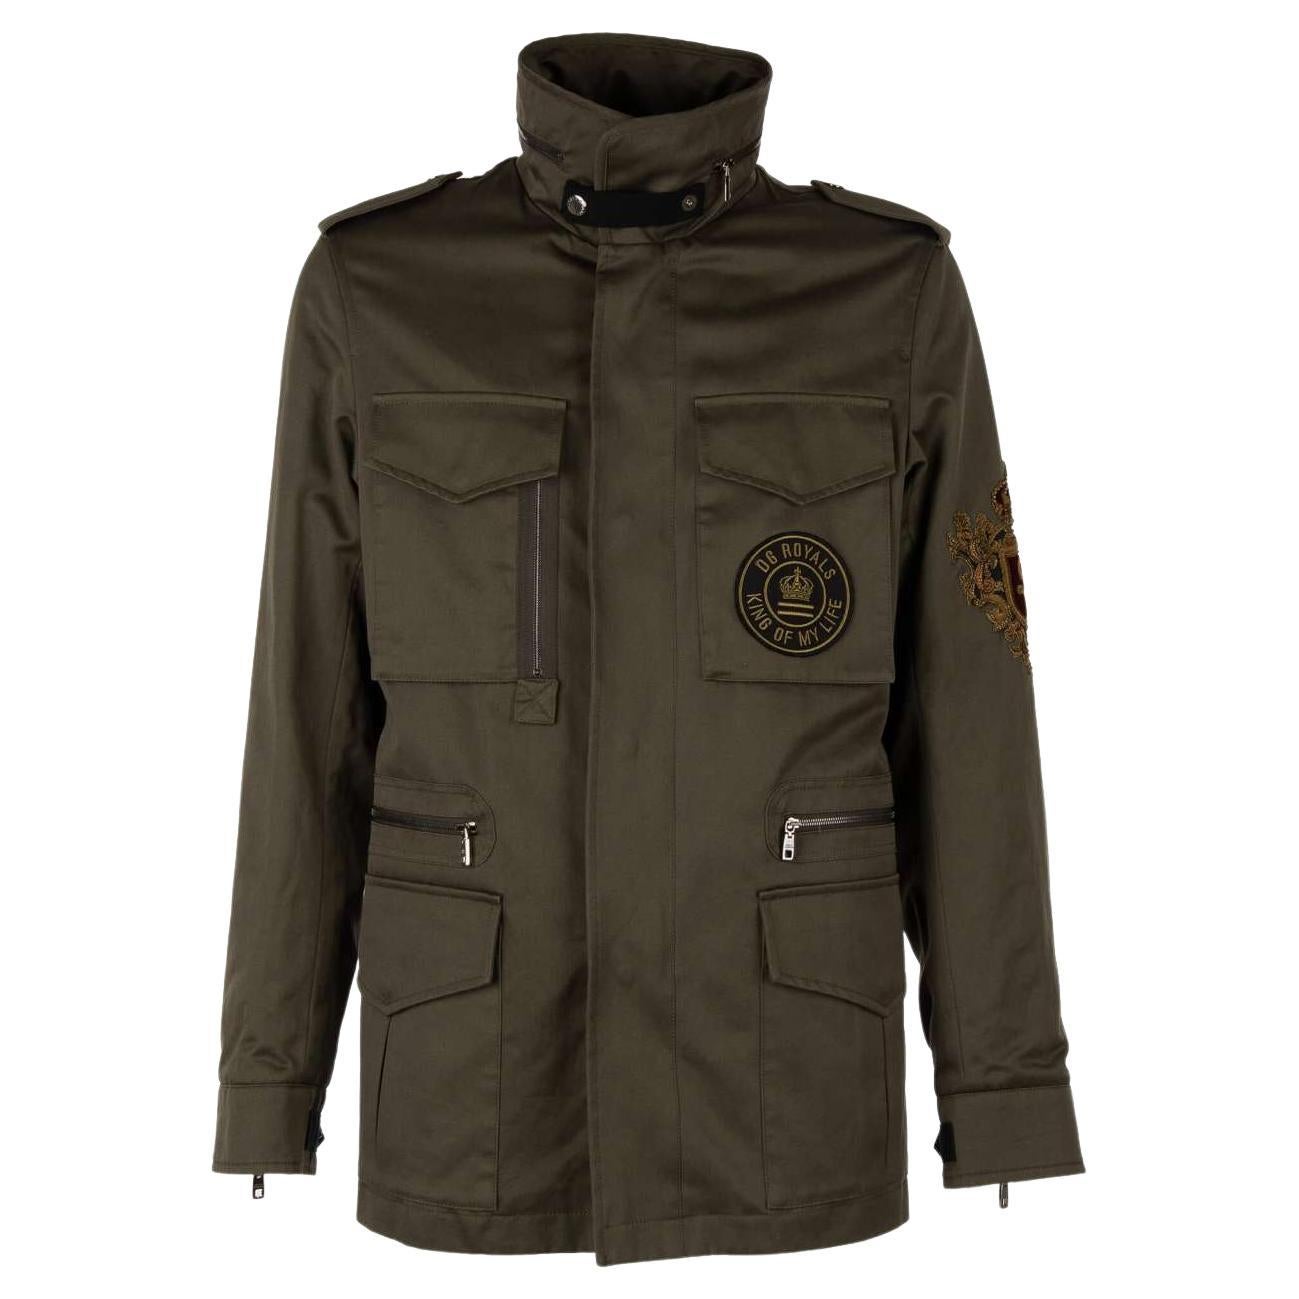 D&G Military Canvas Jacket DG LOVE with Embroidery und Pockets Khaki 54 For Sale